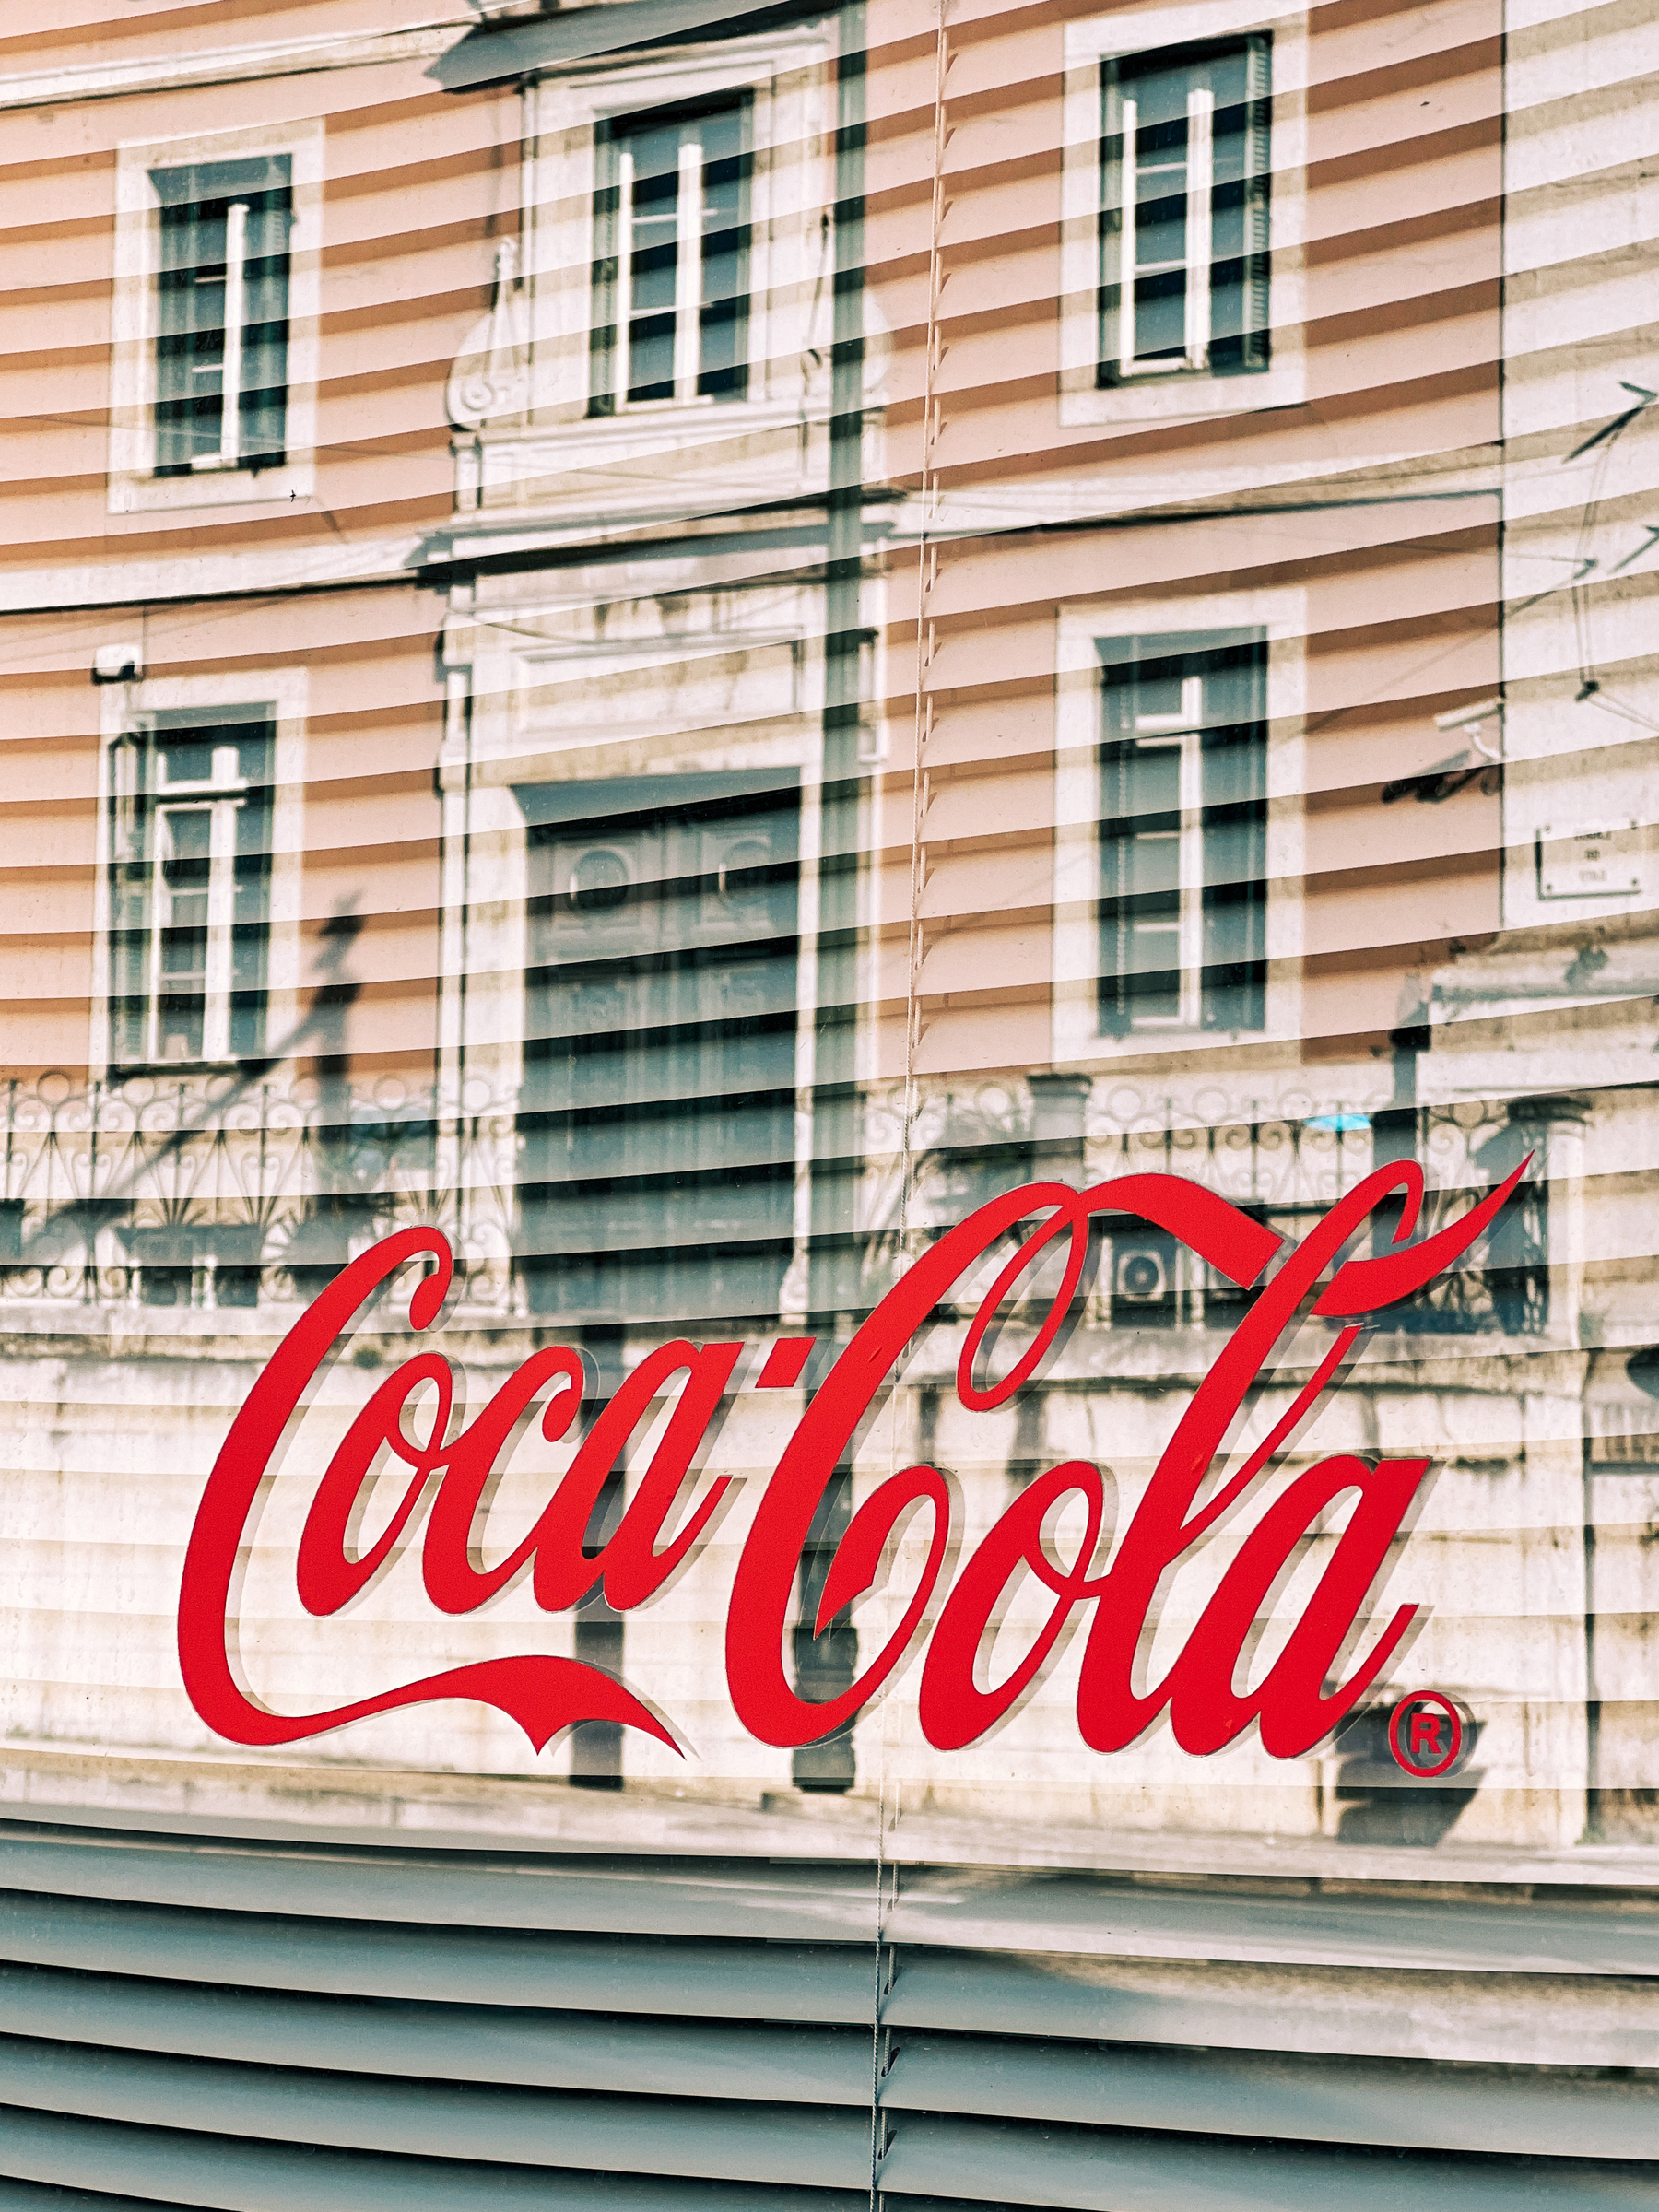 A Coca-Cola logo in red script overlaid on the reflection of a striped building facade in a window.